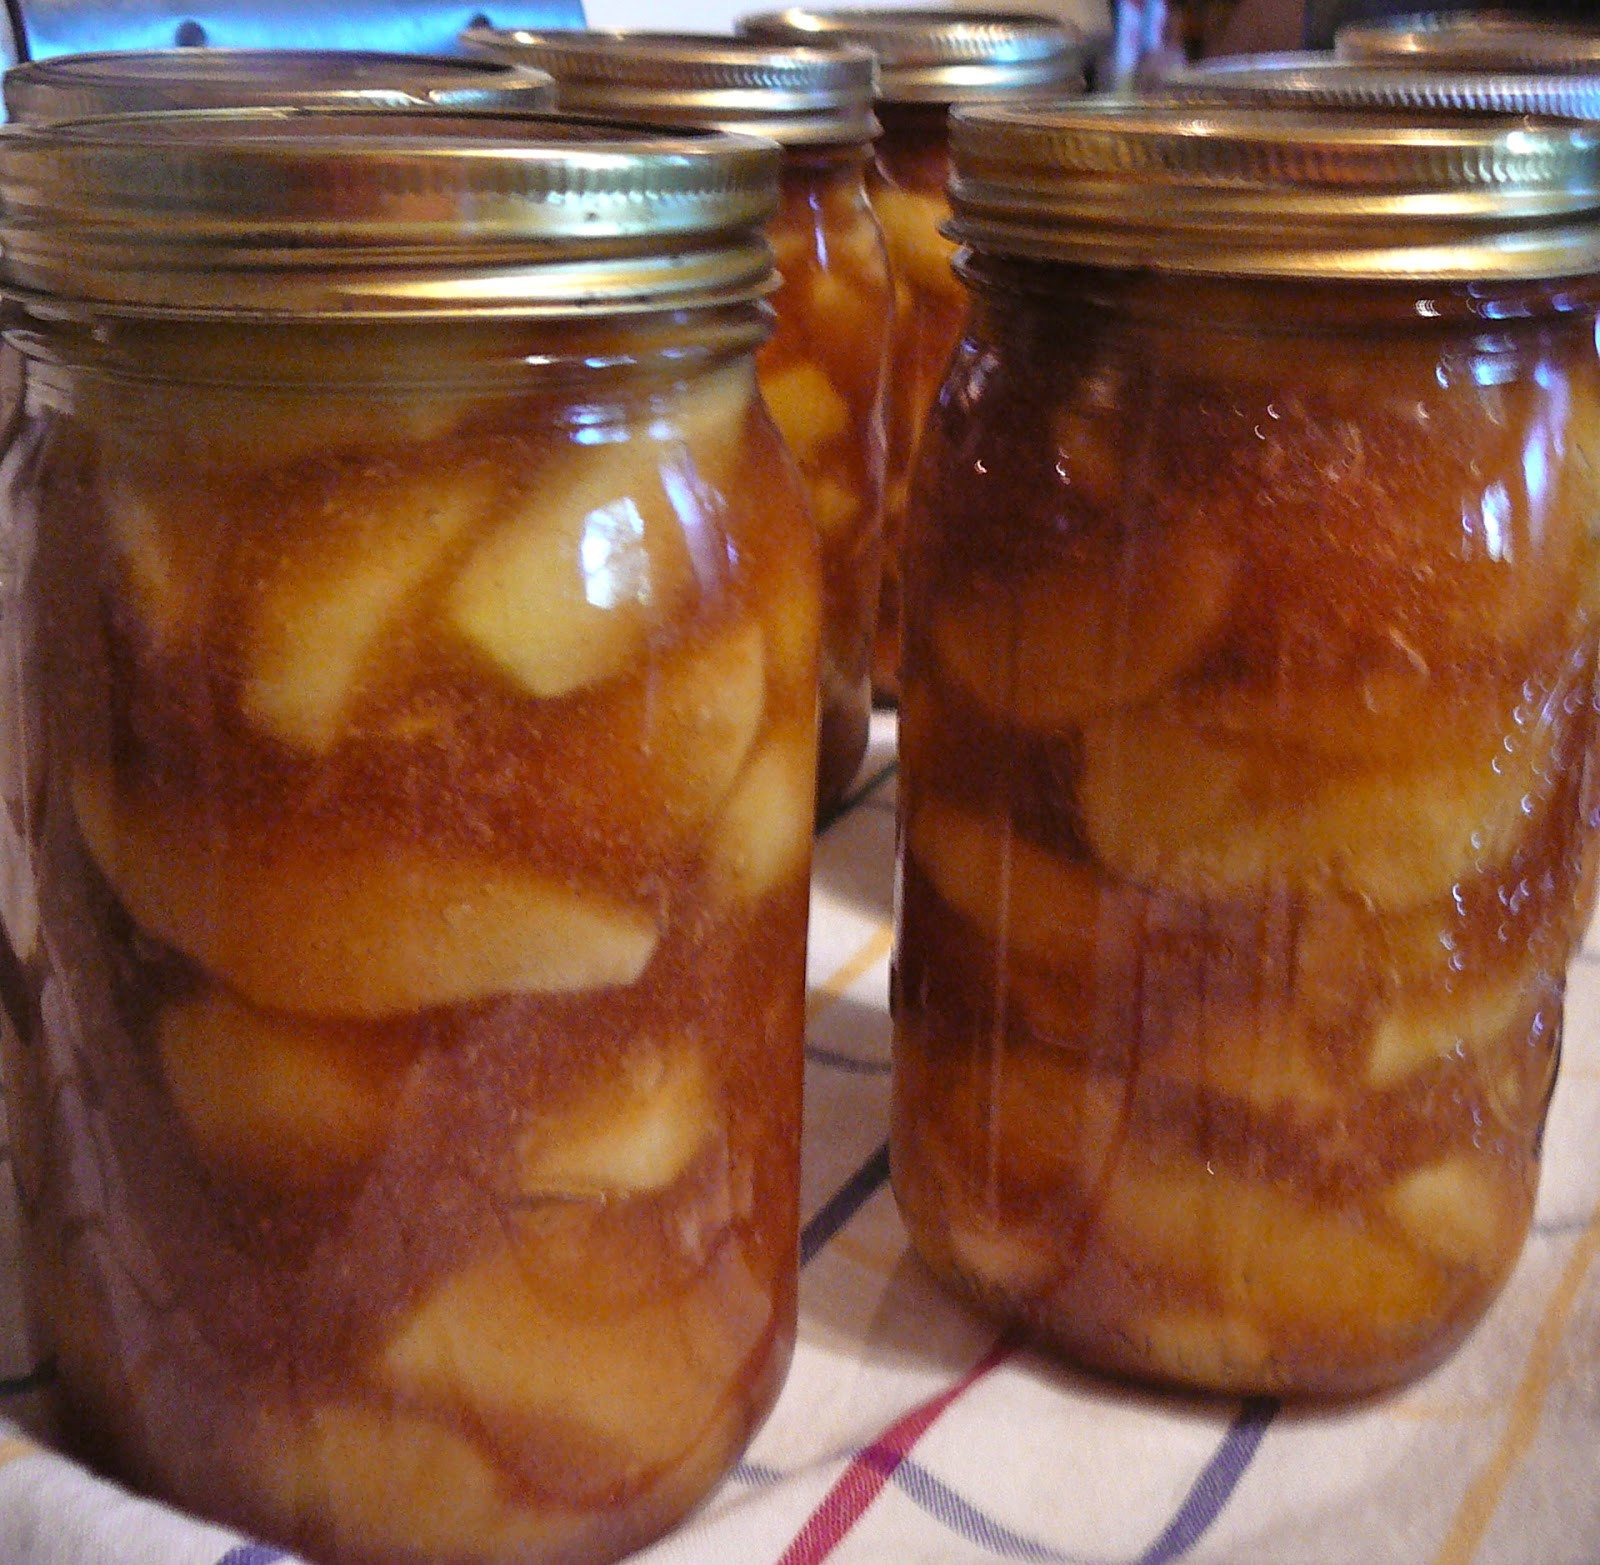 Apple Pie Filling For Canning
 The Hidden Pantry Canning Apple Pie Filling my revision